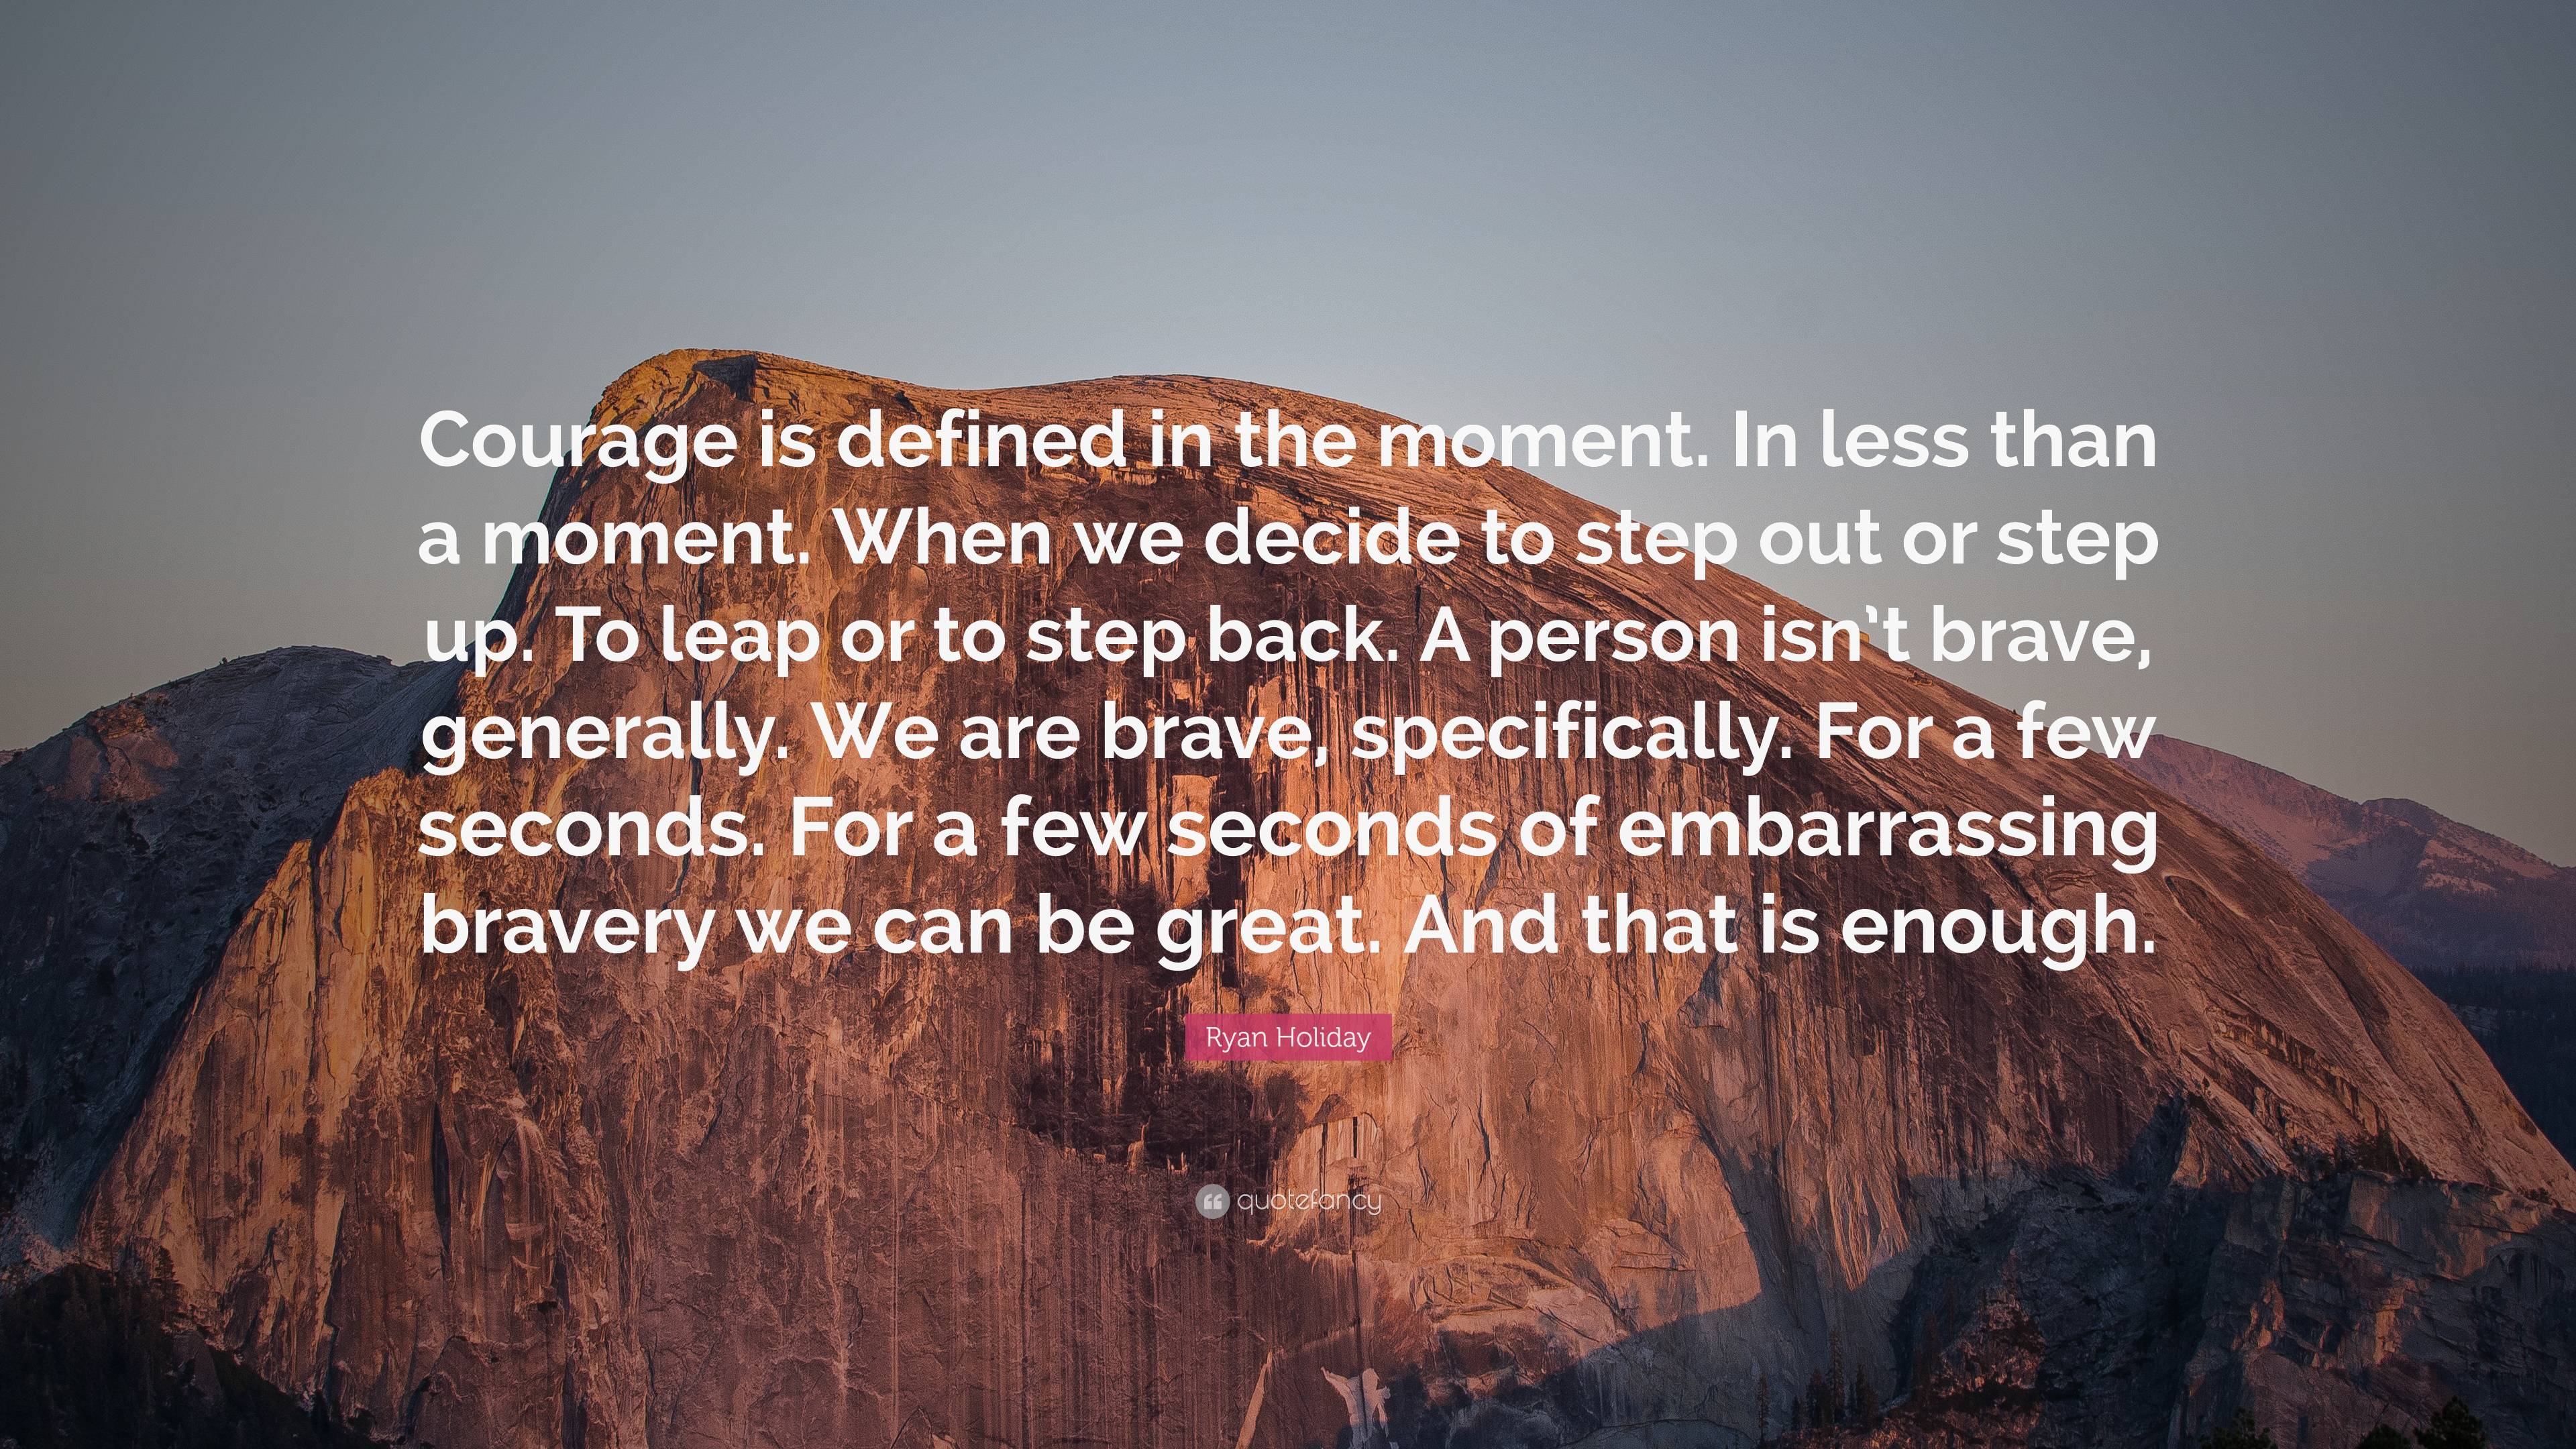 Ryan Holiday on How Courage Can (and Should) Change Your Life